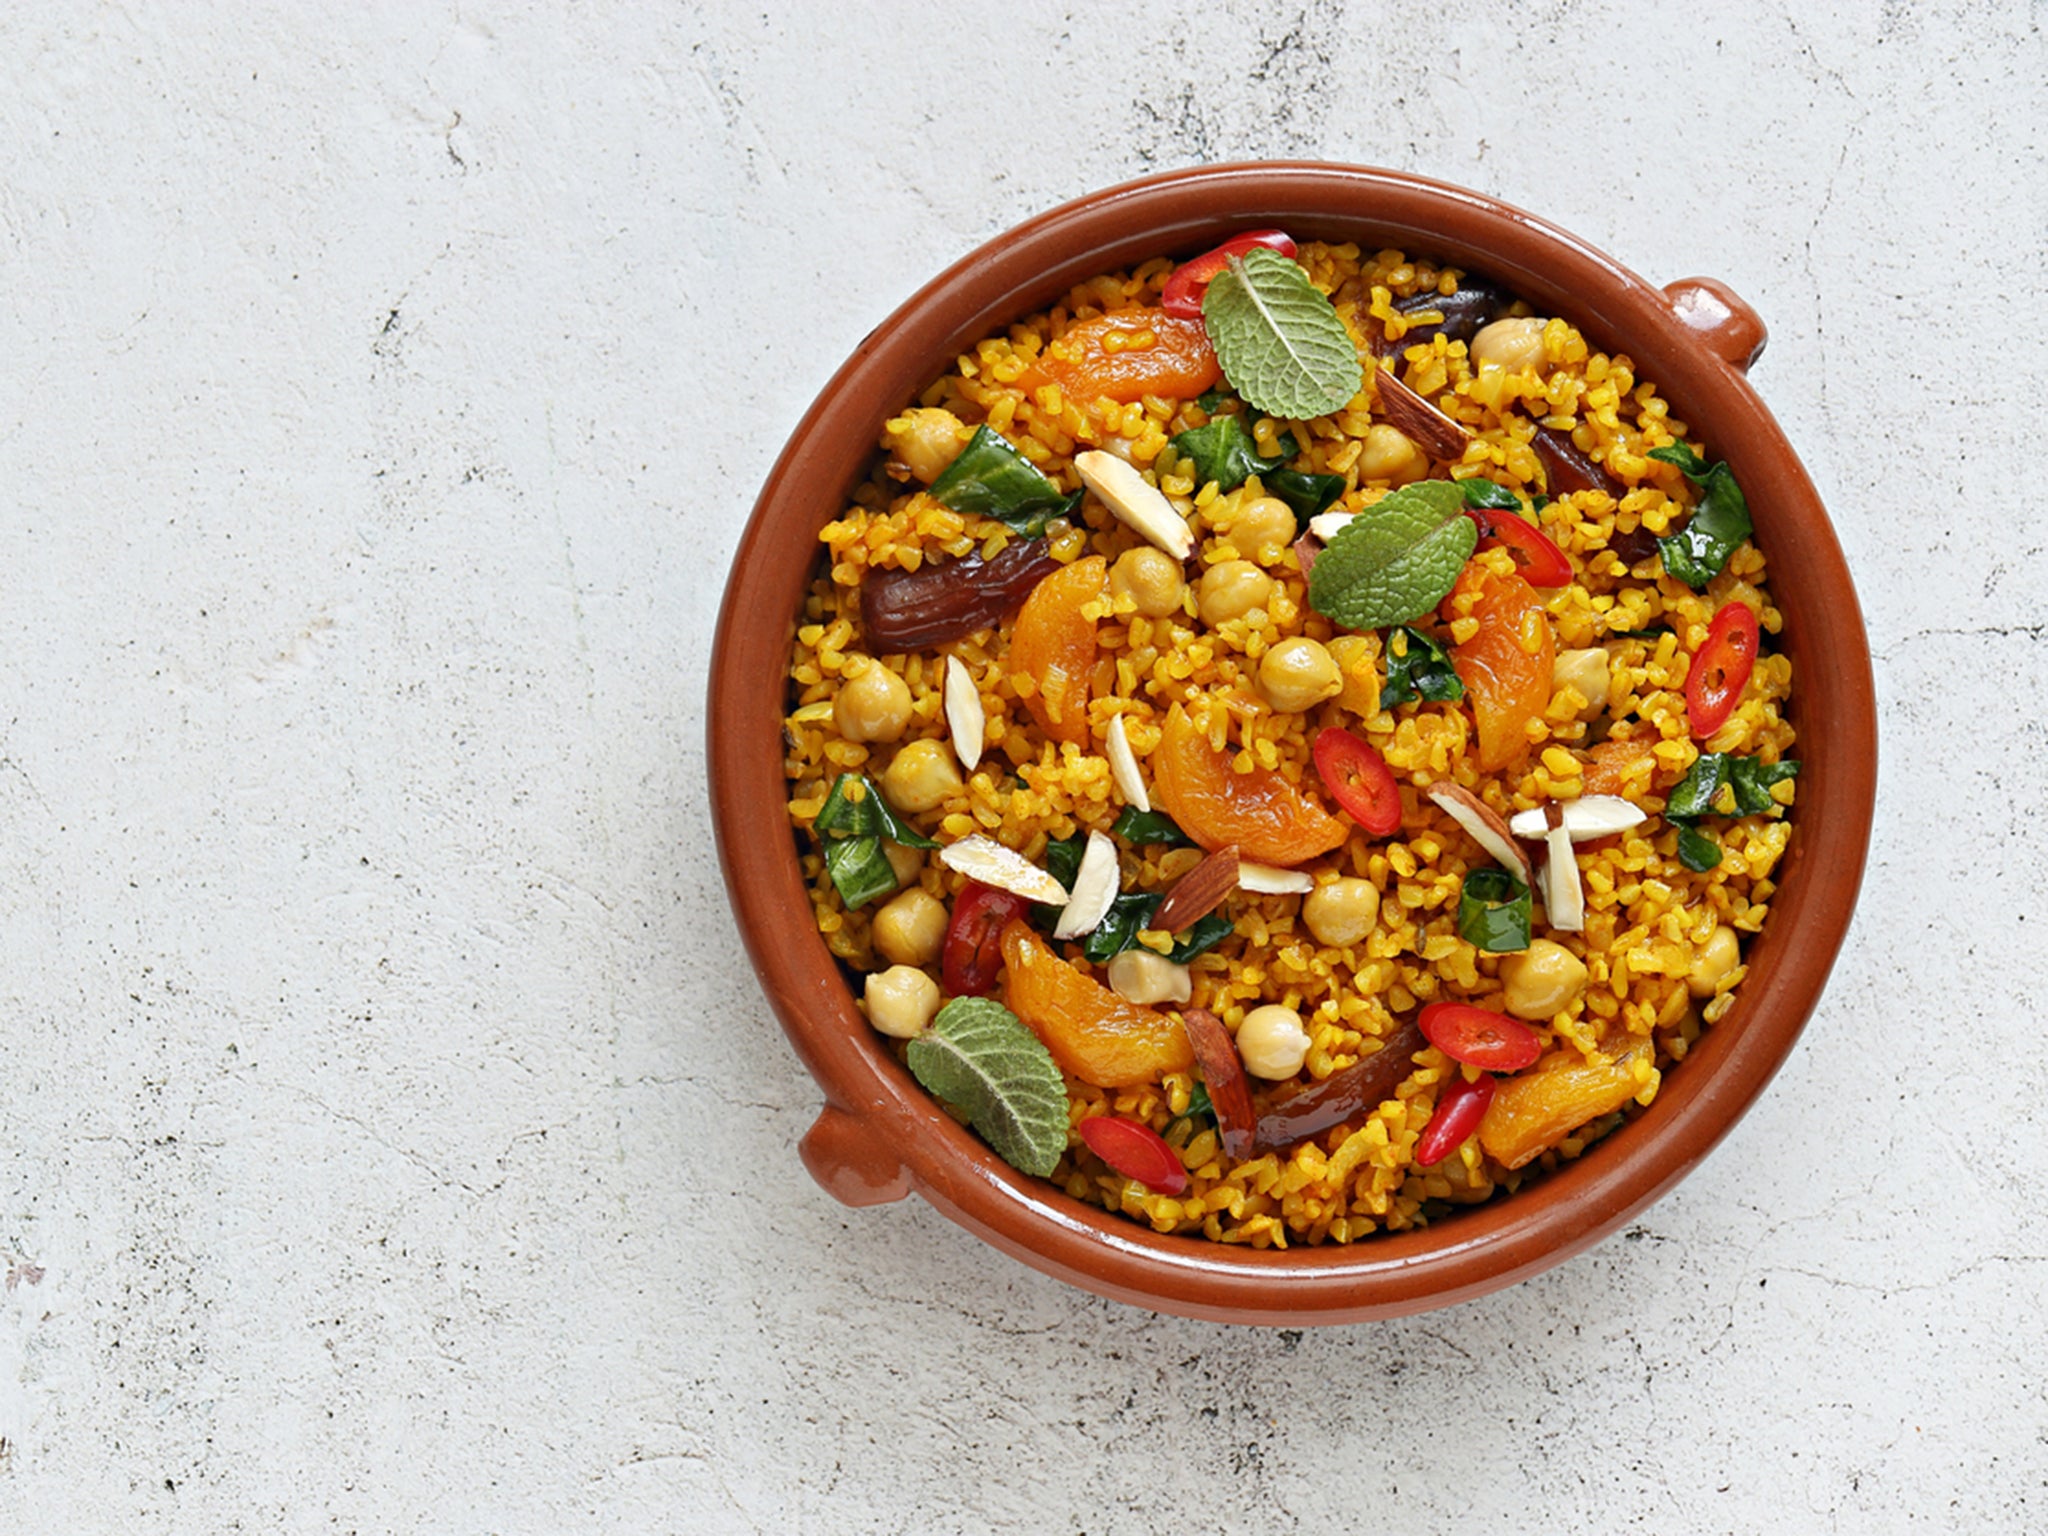 This Moroccan-inspired vegetarian tagine is bursting with flavour